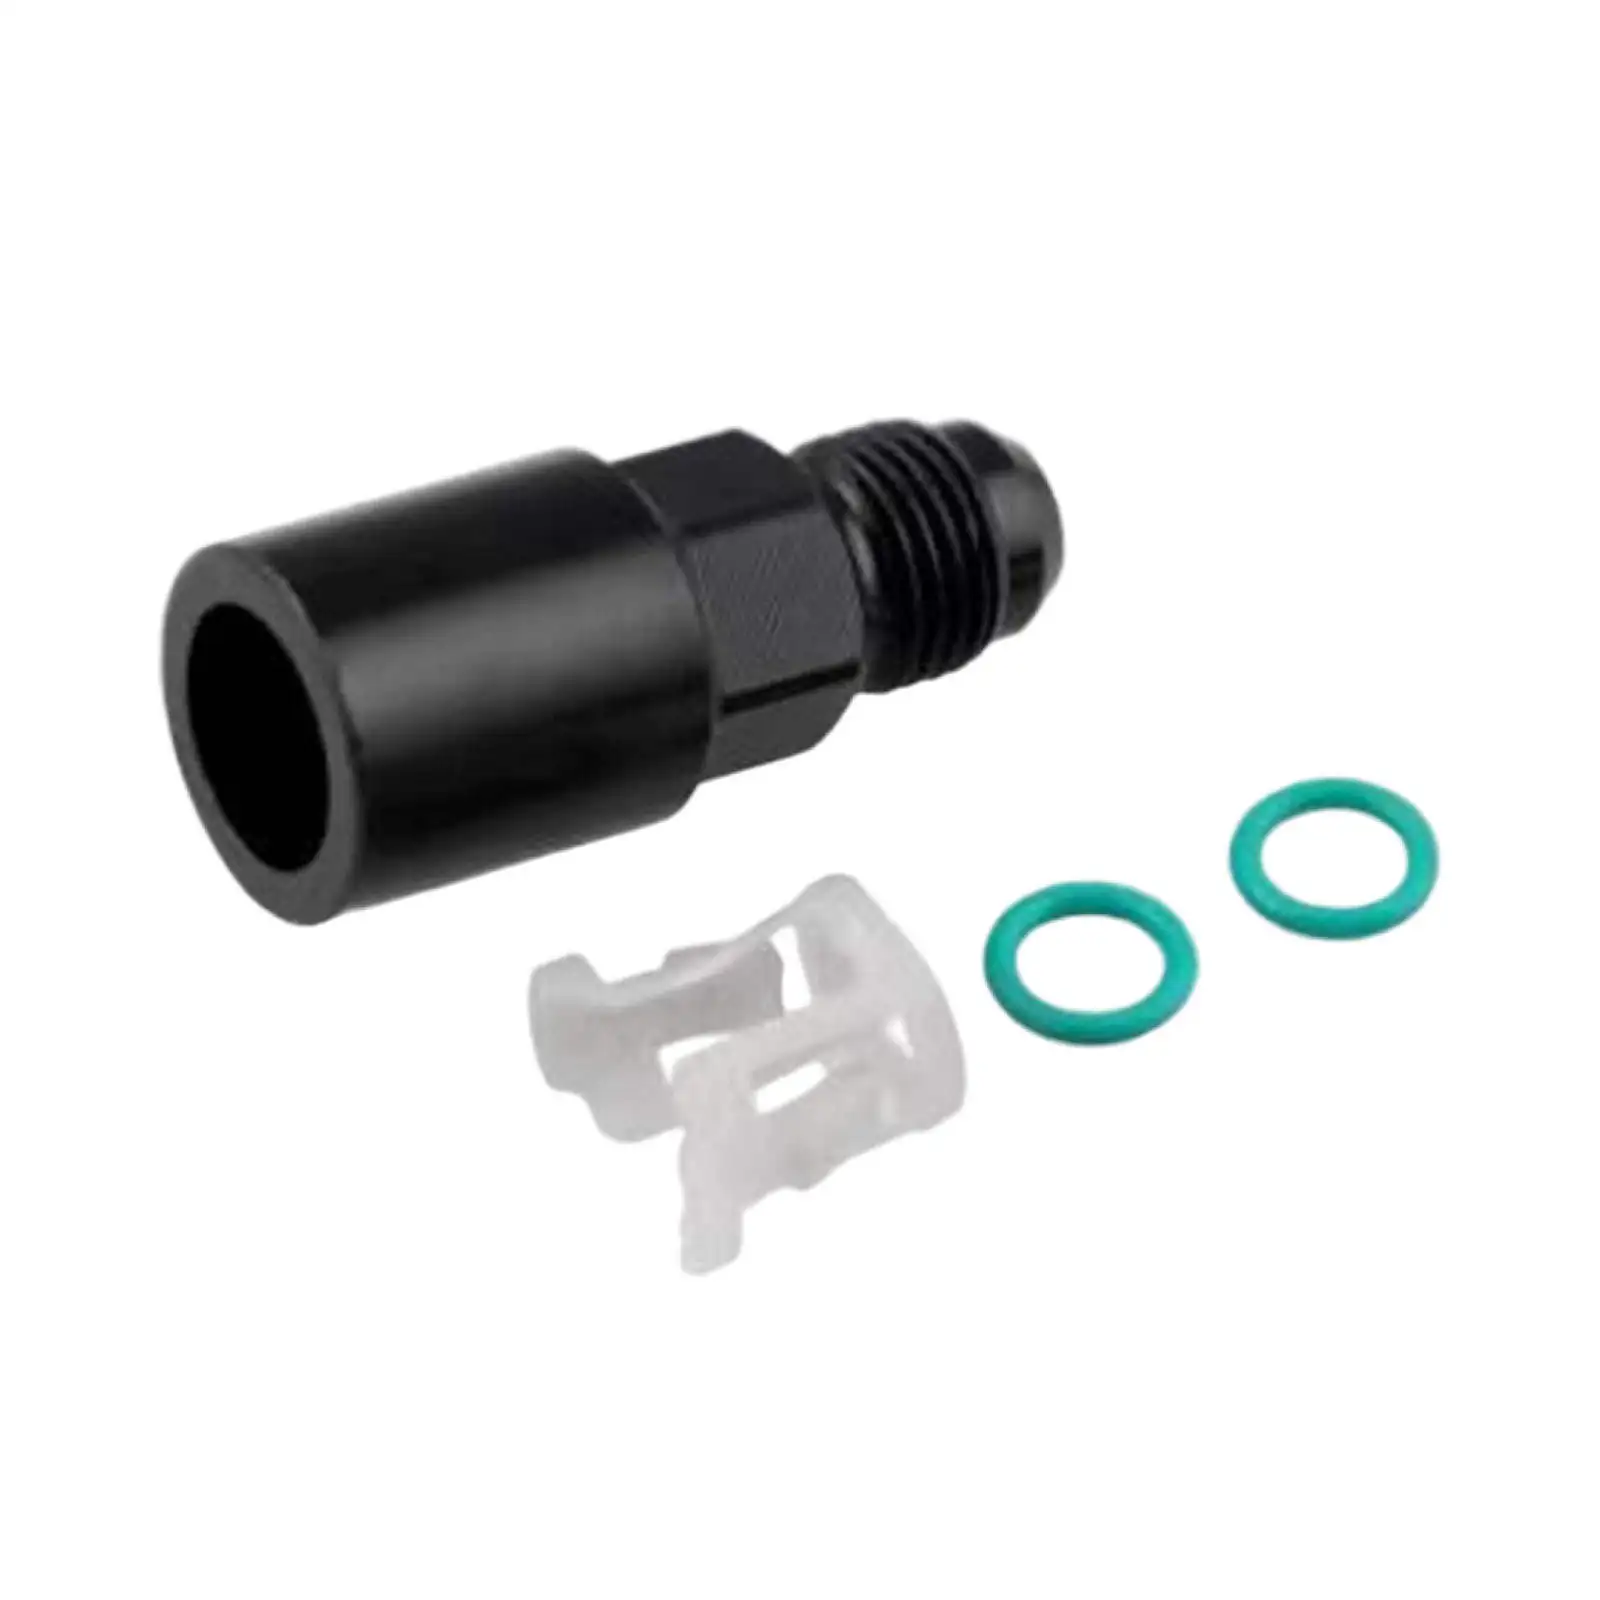 Fuel Adapter Fitting 6AN to 5/16 GM Black LS W/ Clip Female Quick Connect Oil Line Swivel Pipe Adapter Fit for LT1 LT4 LS1